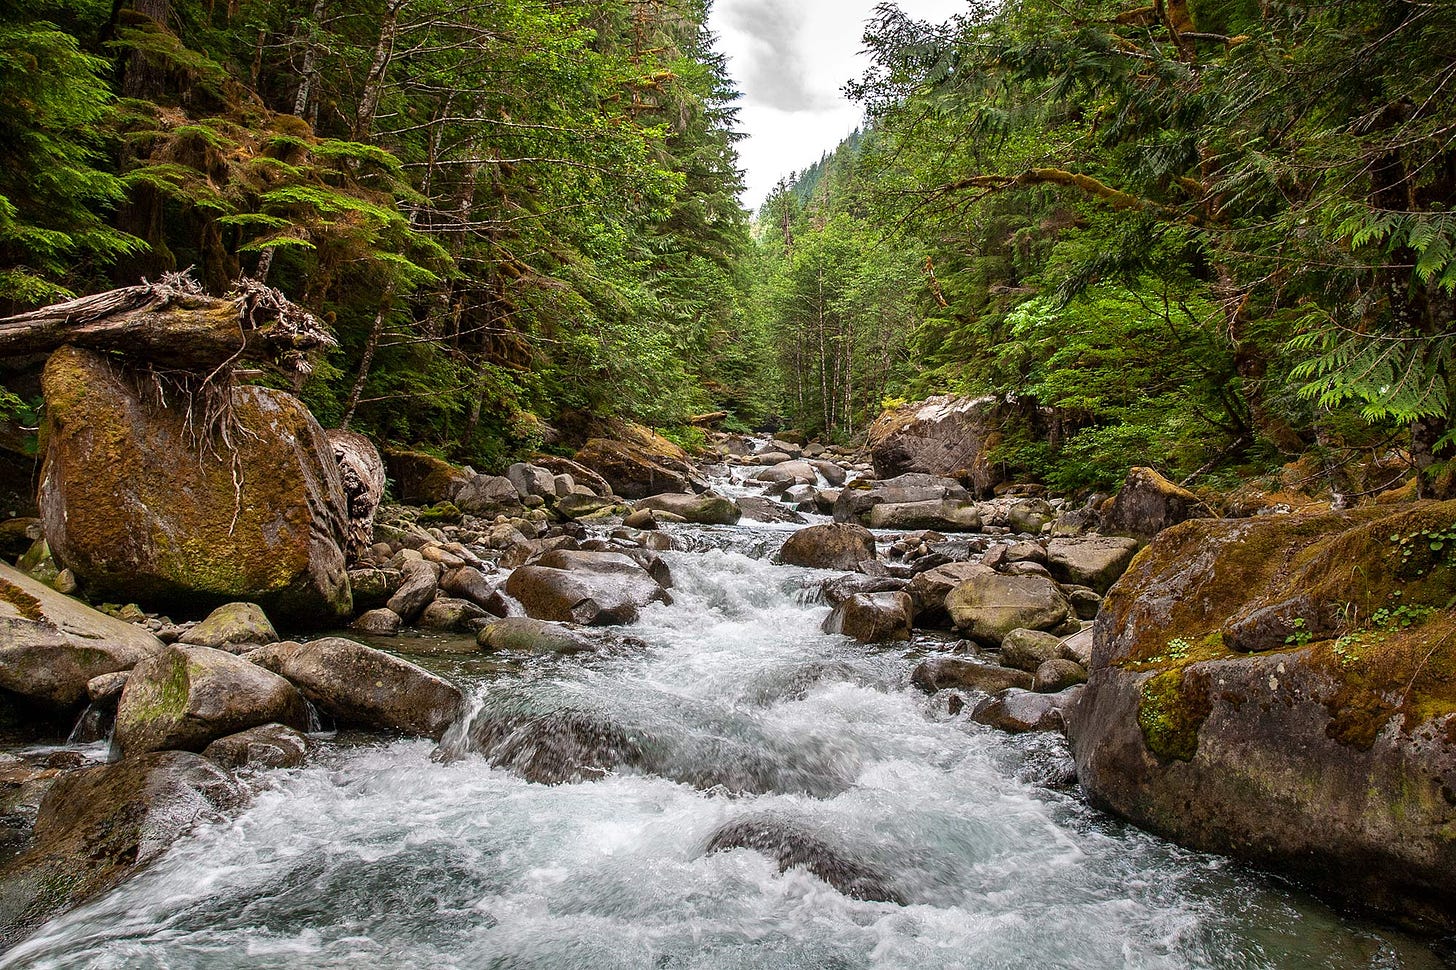 looking upriver at cold blue water splashing white over a series of boulders just visible through the foam, large brown boulders edging the river, with the forest just beyond